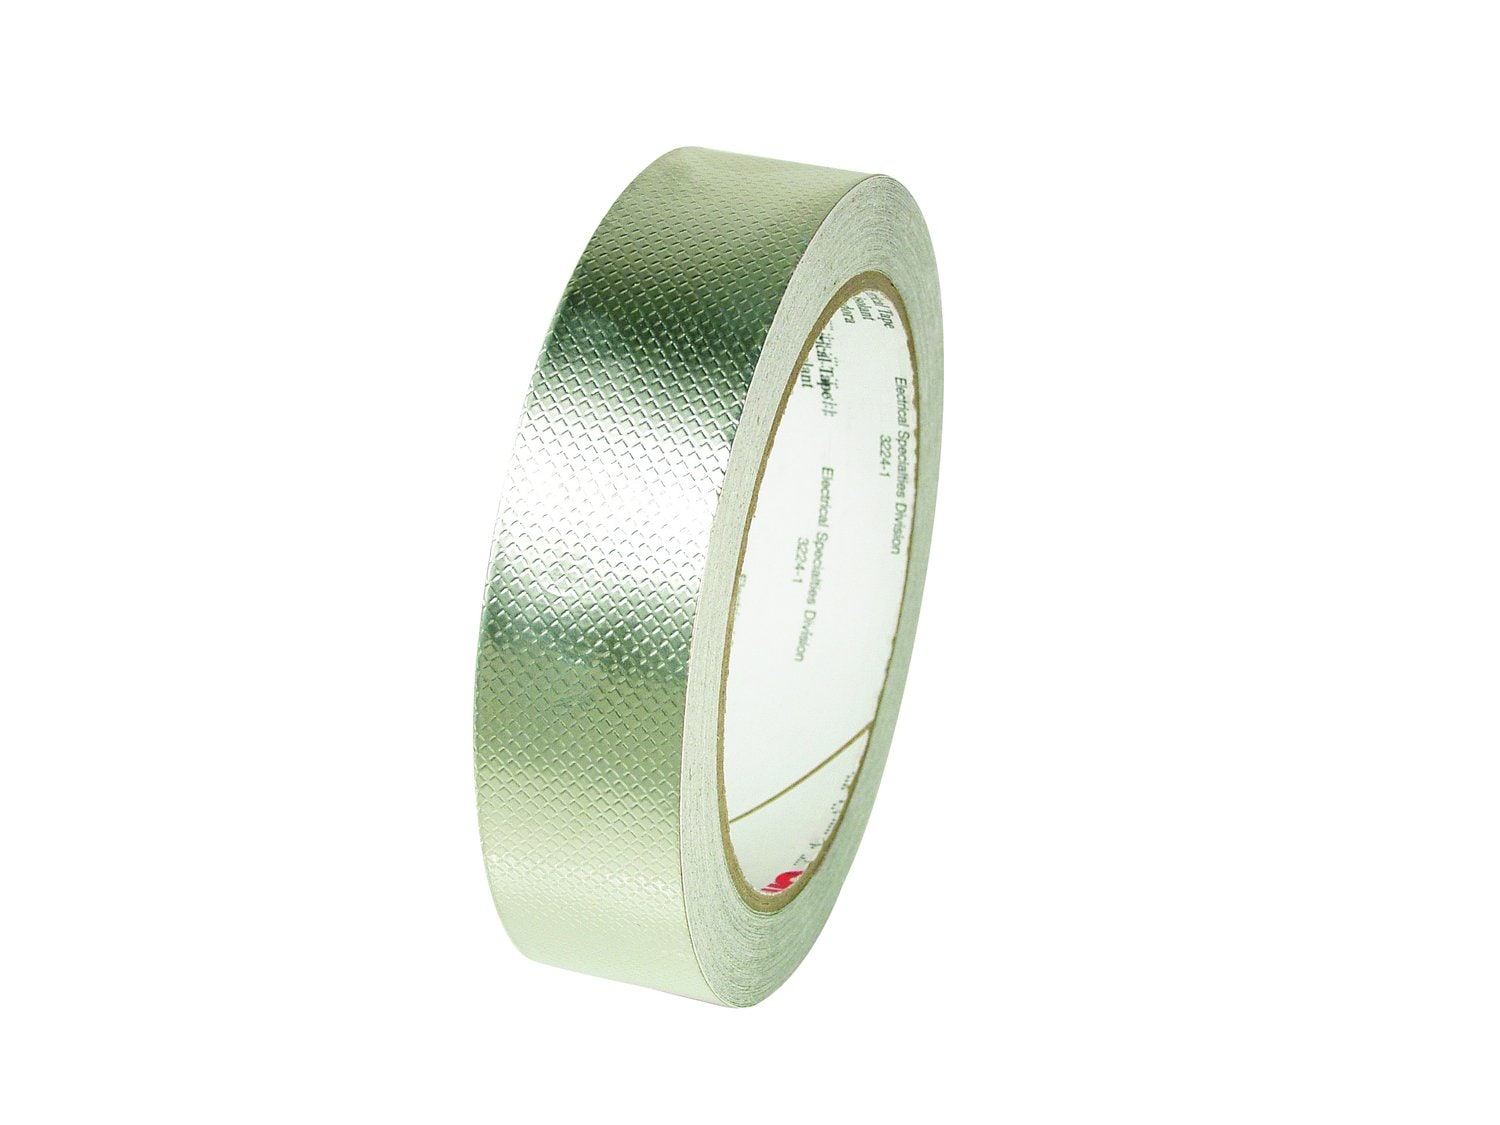 3M 9772-30 Electrically Conductive Double-Sided Tape 500 mm x 100 m Roll